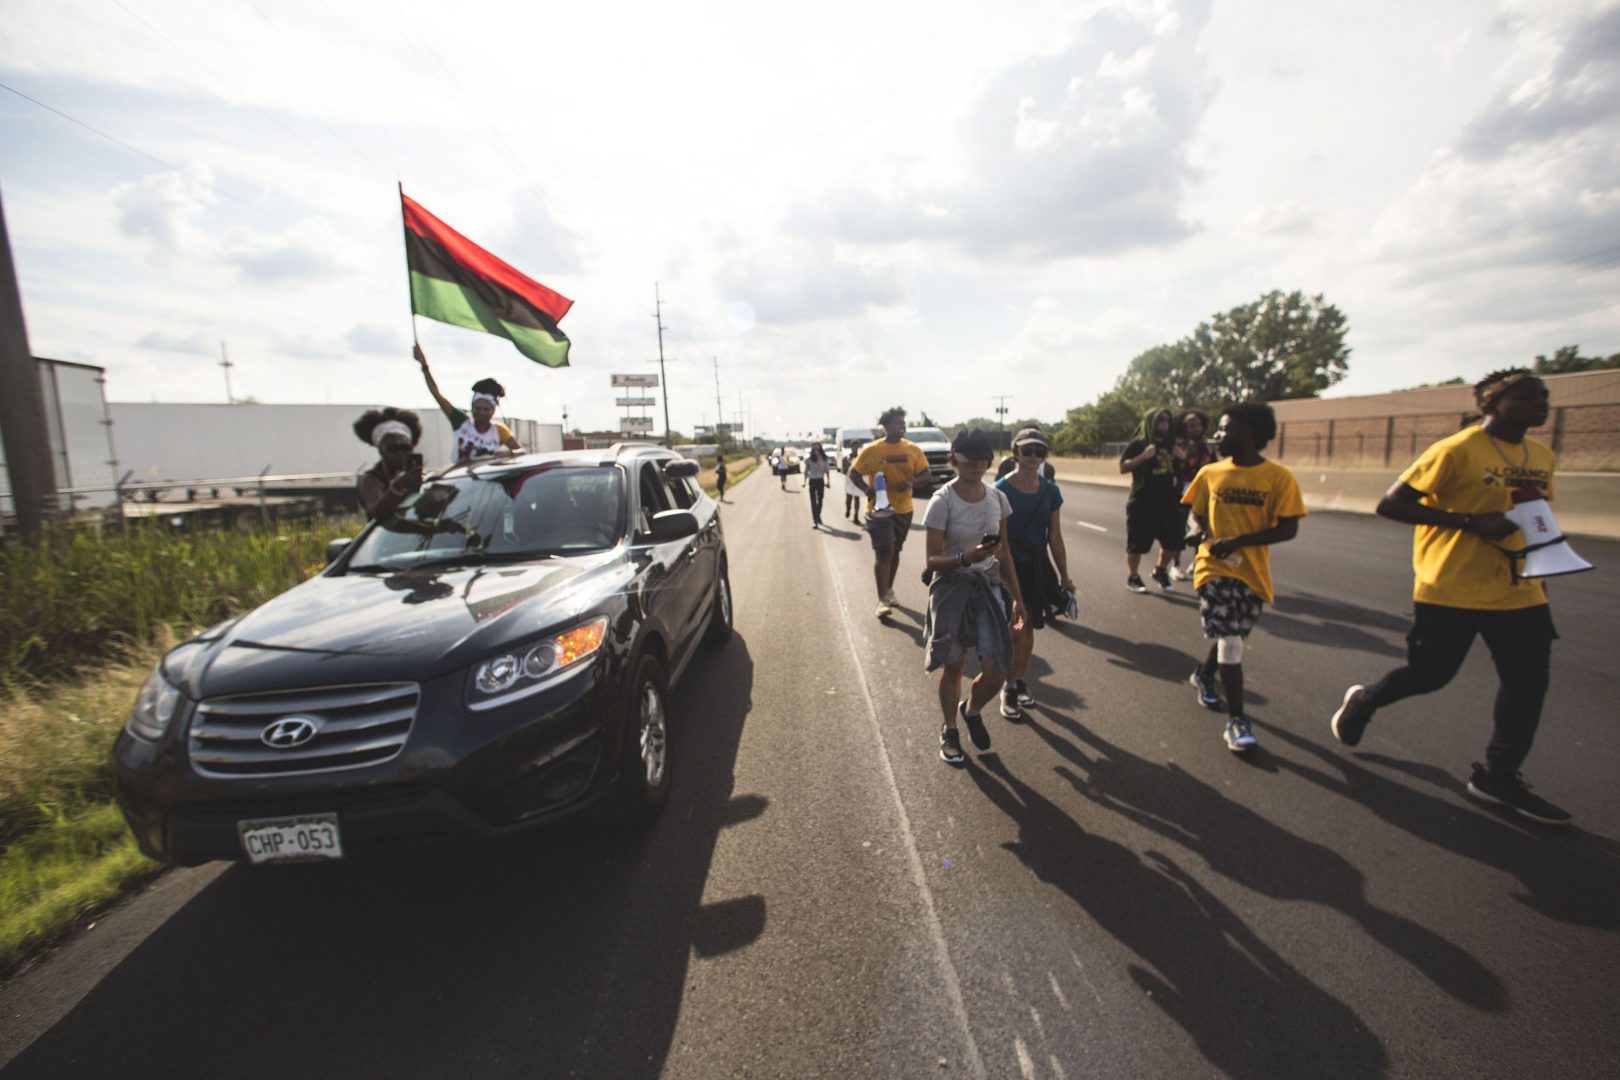 Civil rights marchers on a journey from Milwaukee to Washington, D.C. are seen here in Youngstown, Ohio.